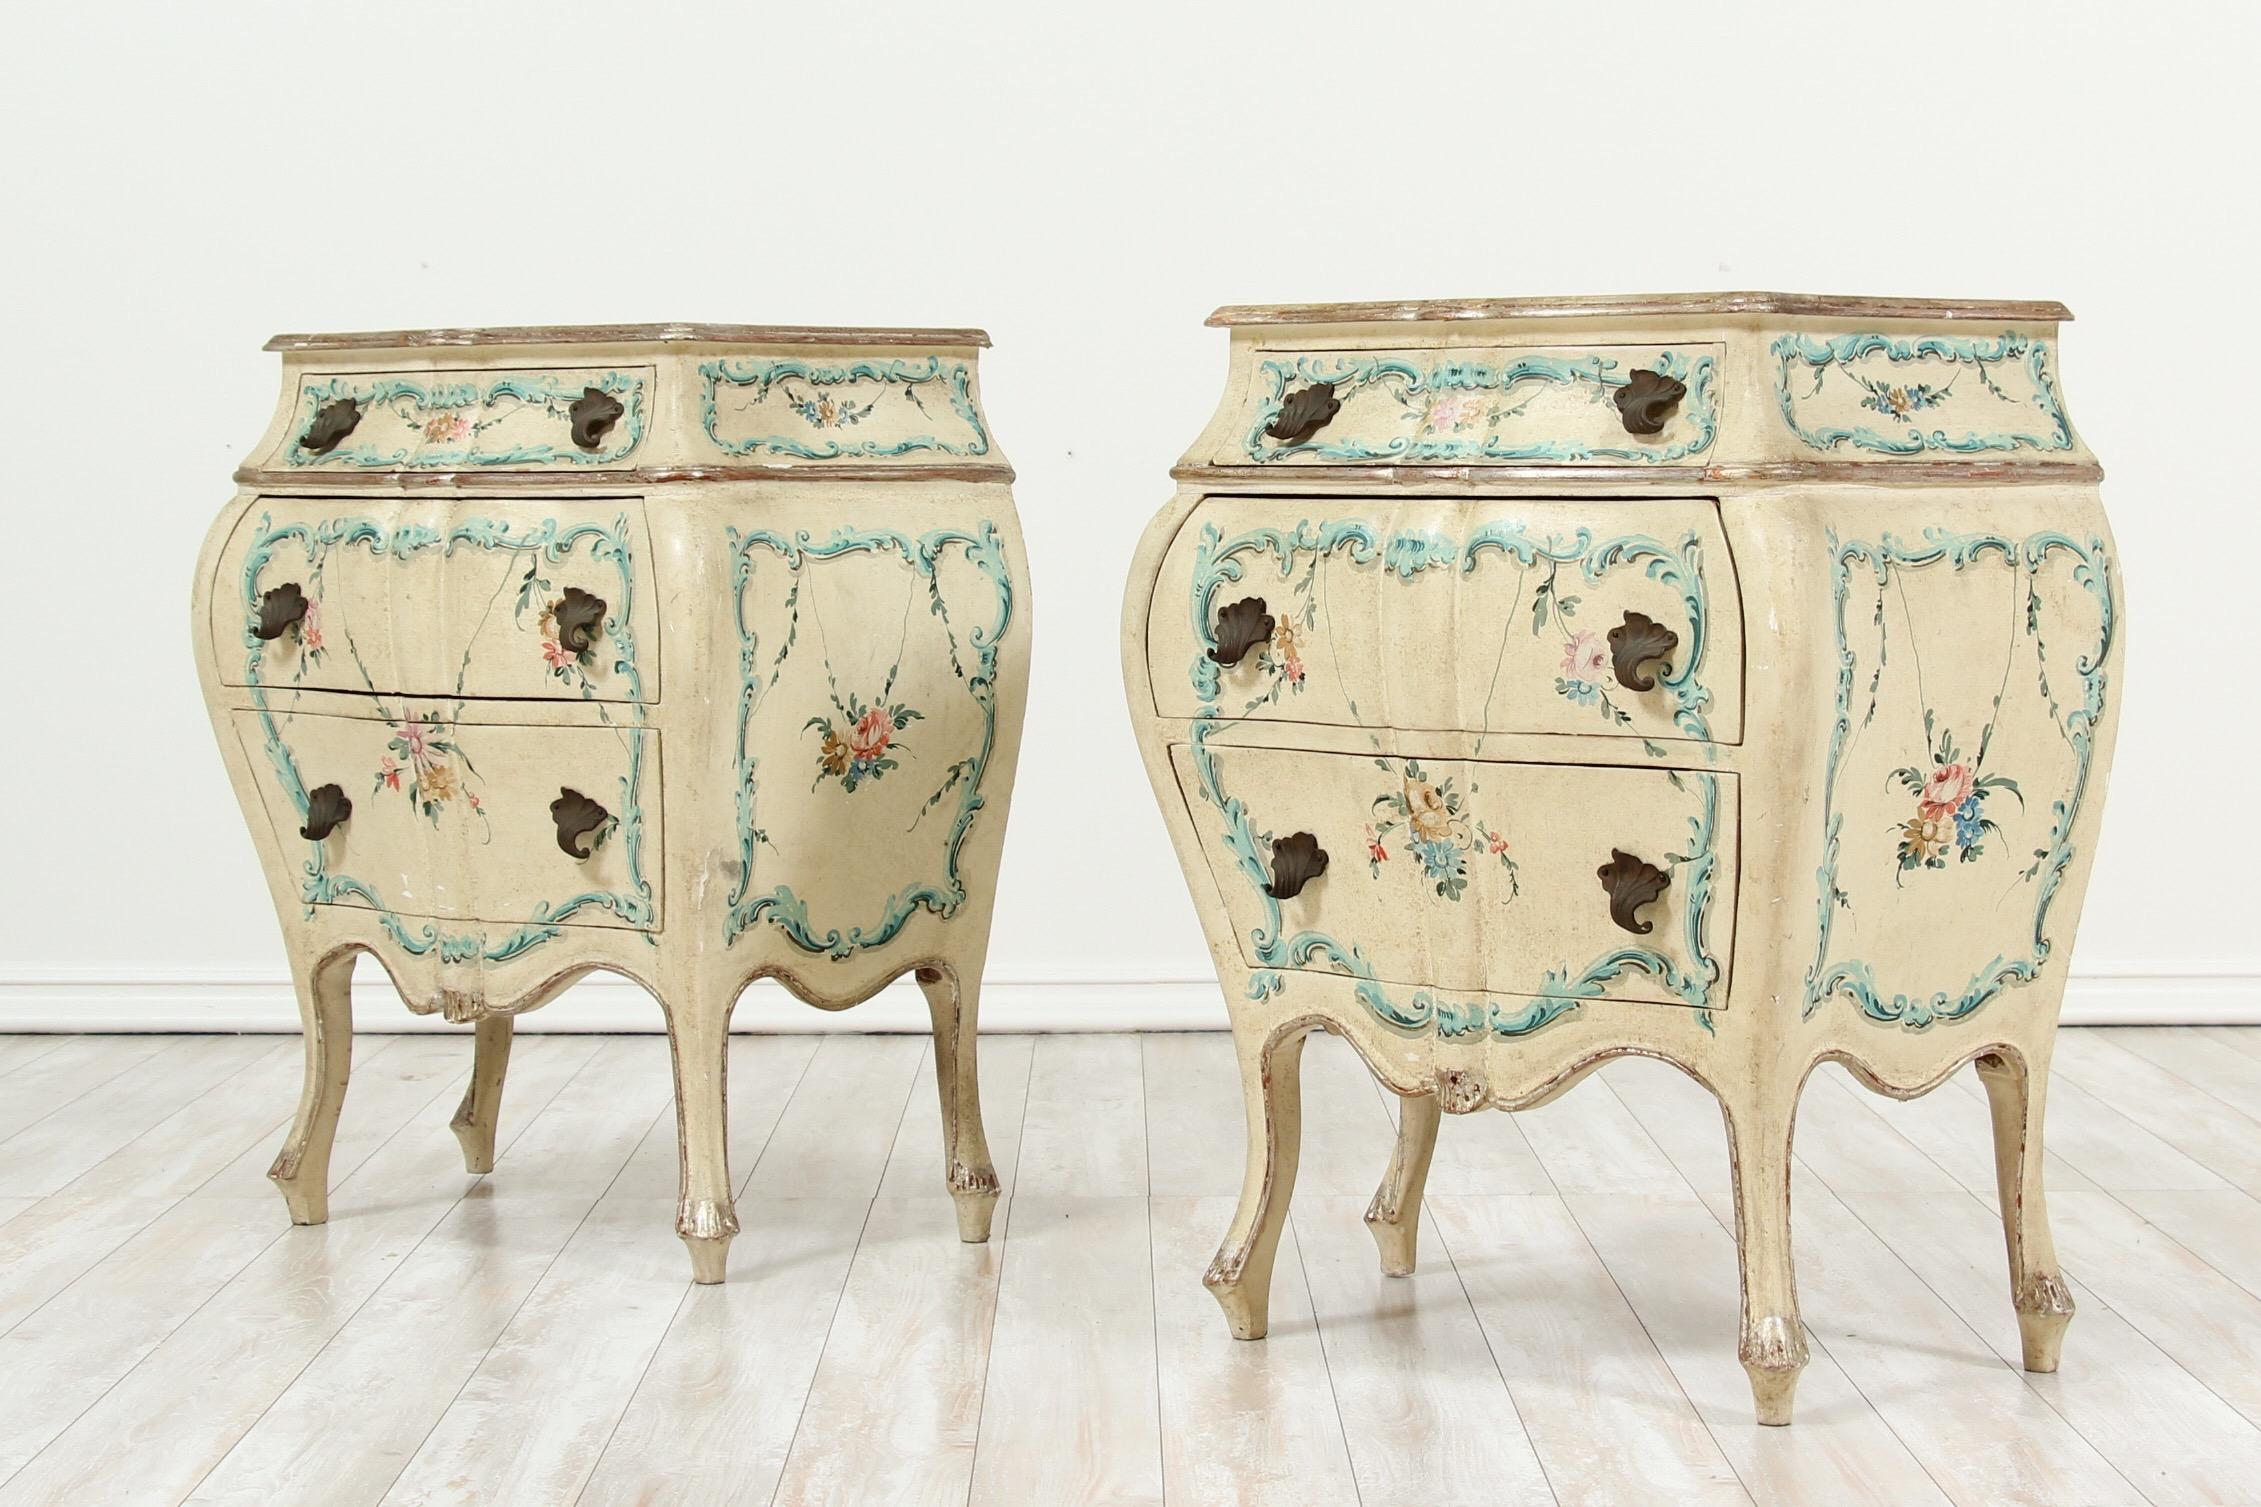 Elegant pair of Italian, 1930s bombe chests or nightstands hand decorated in the Venetian style. These shapely nightstands feature hand painted floral decorations, silver-gilt borders and faux-marble painted tops. Wear to paint finish is consistent